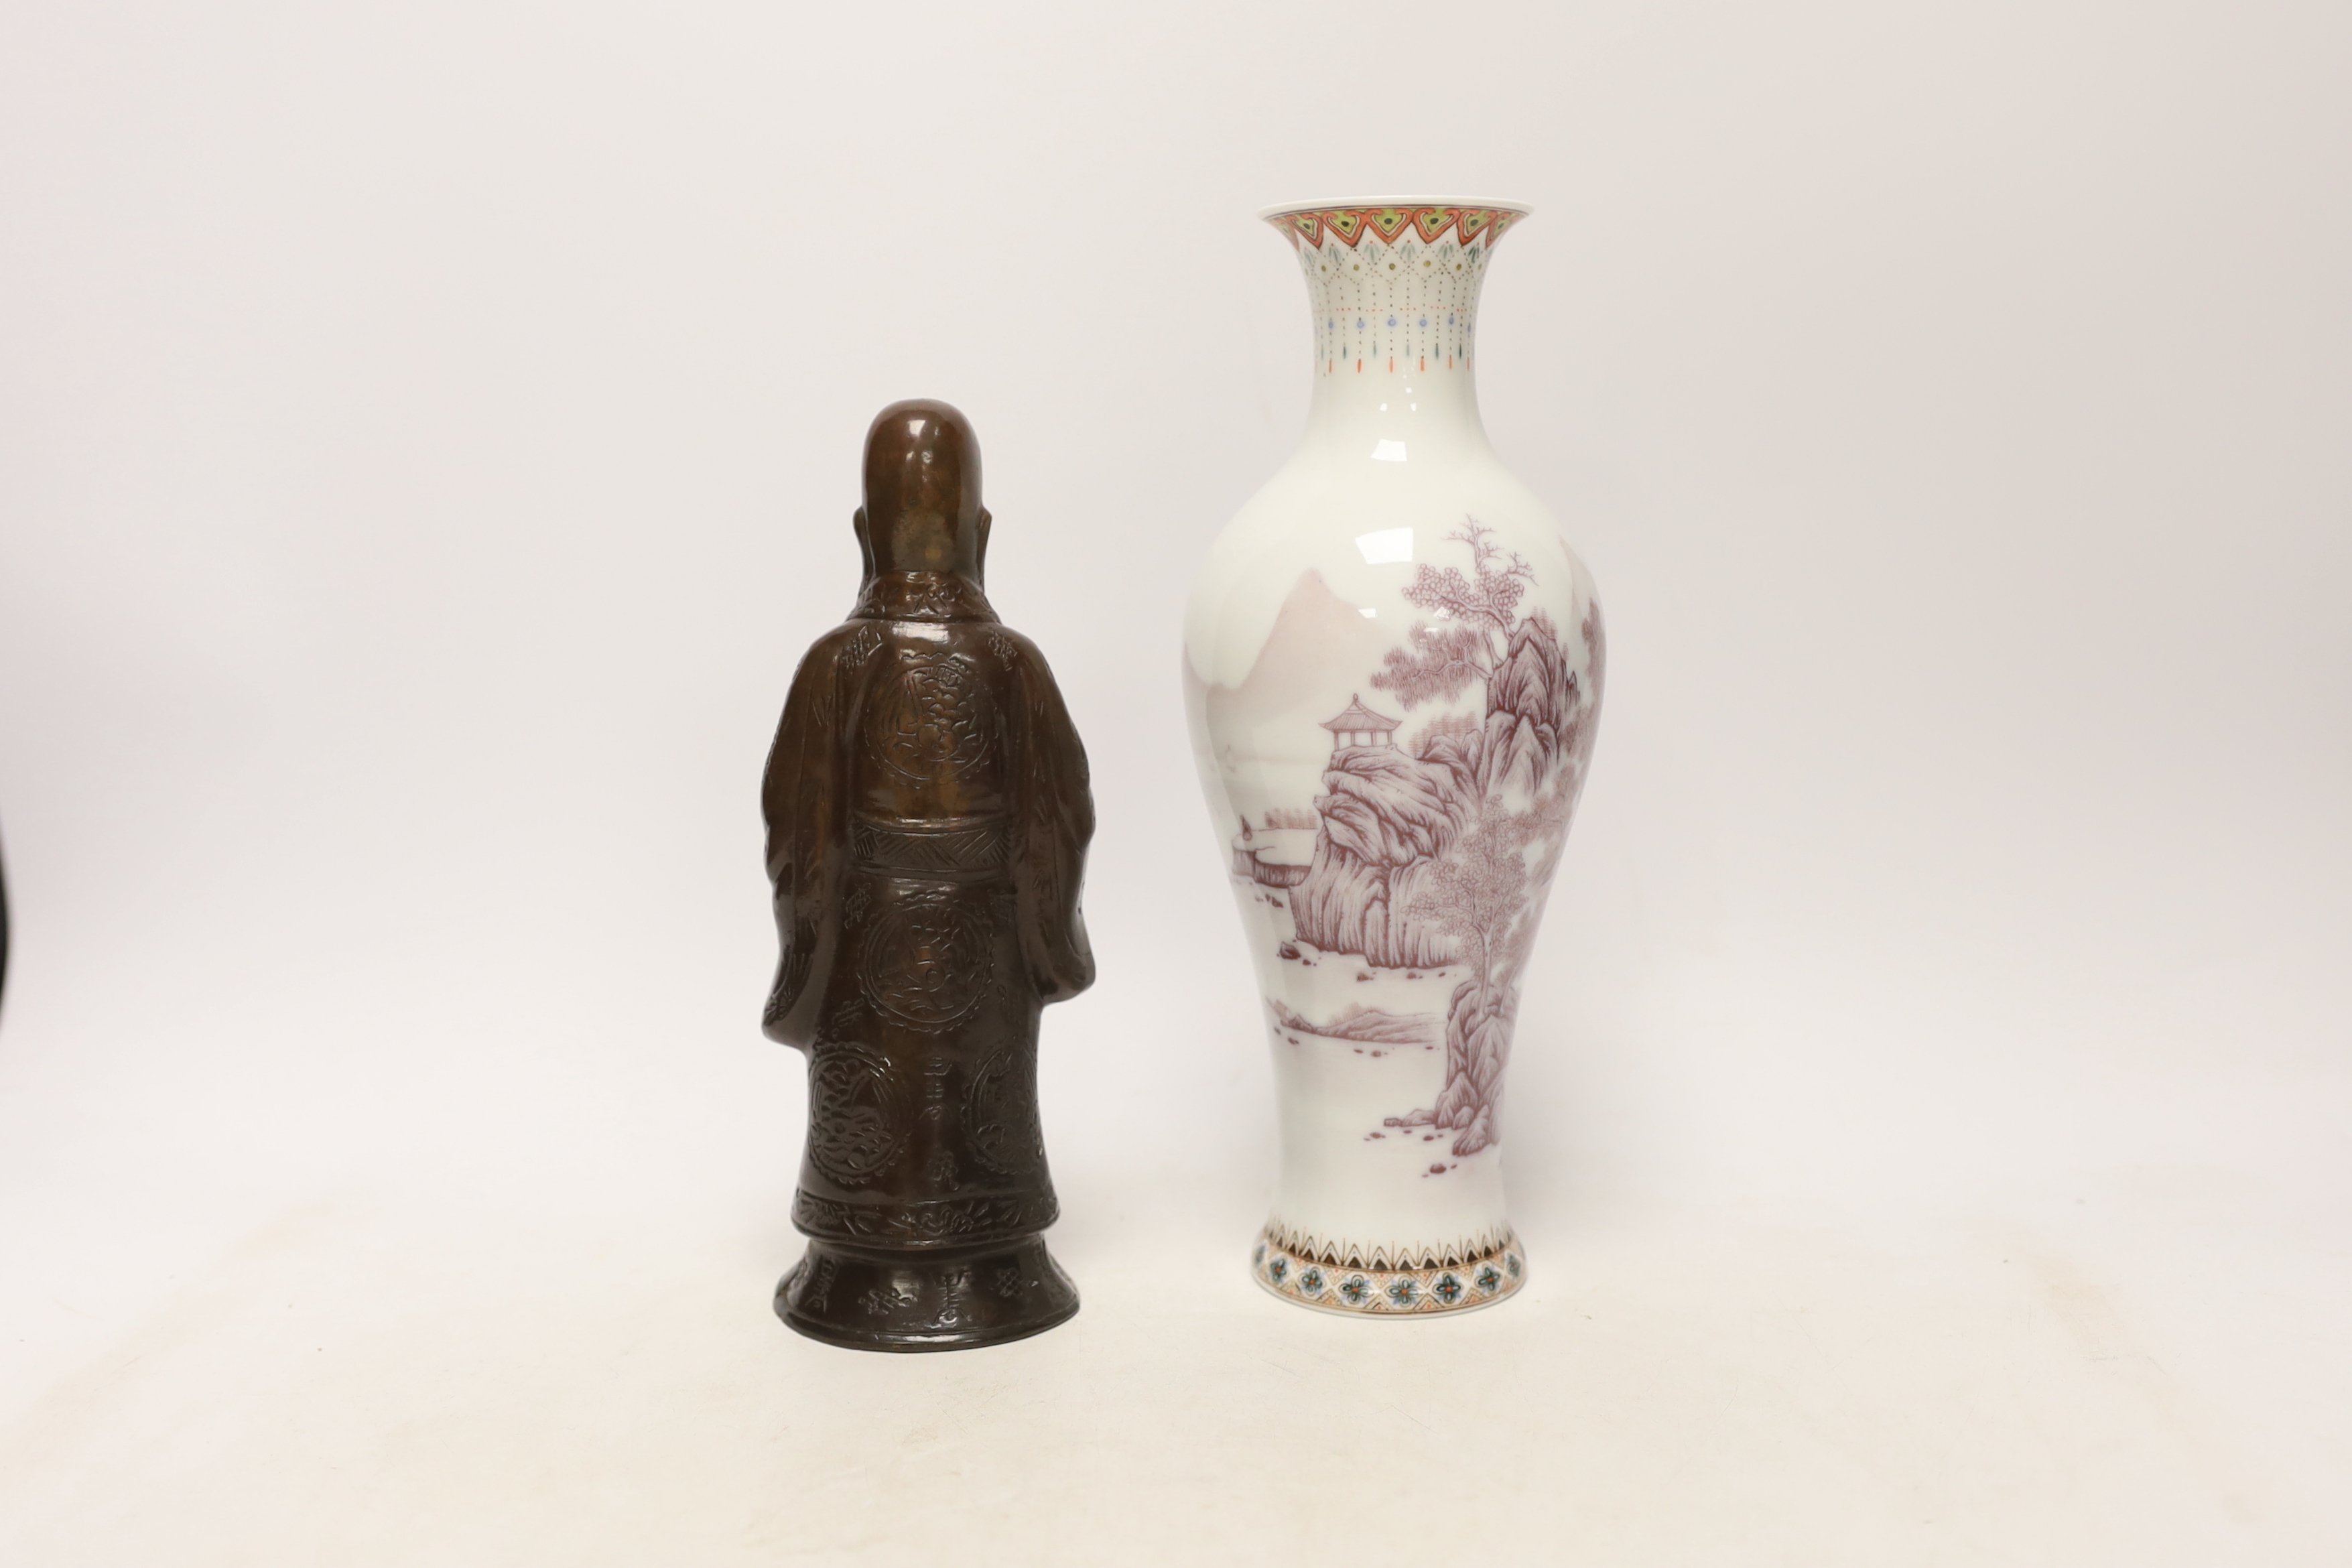 A Chinese bronze figure of Shou Lao and a Chinese Republic period vase, 1991, largest 26cm high - Image 2 of 4